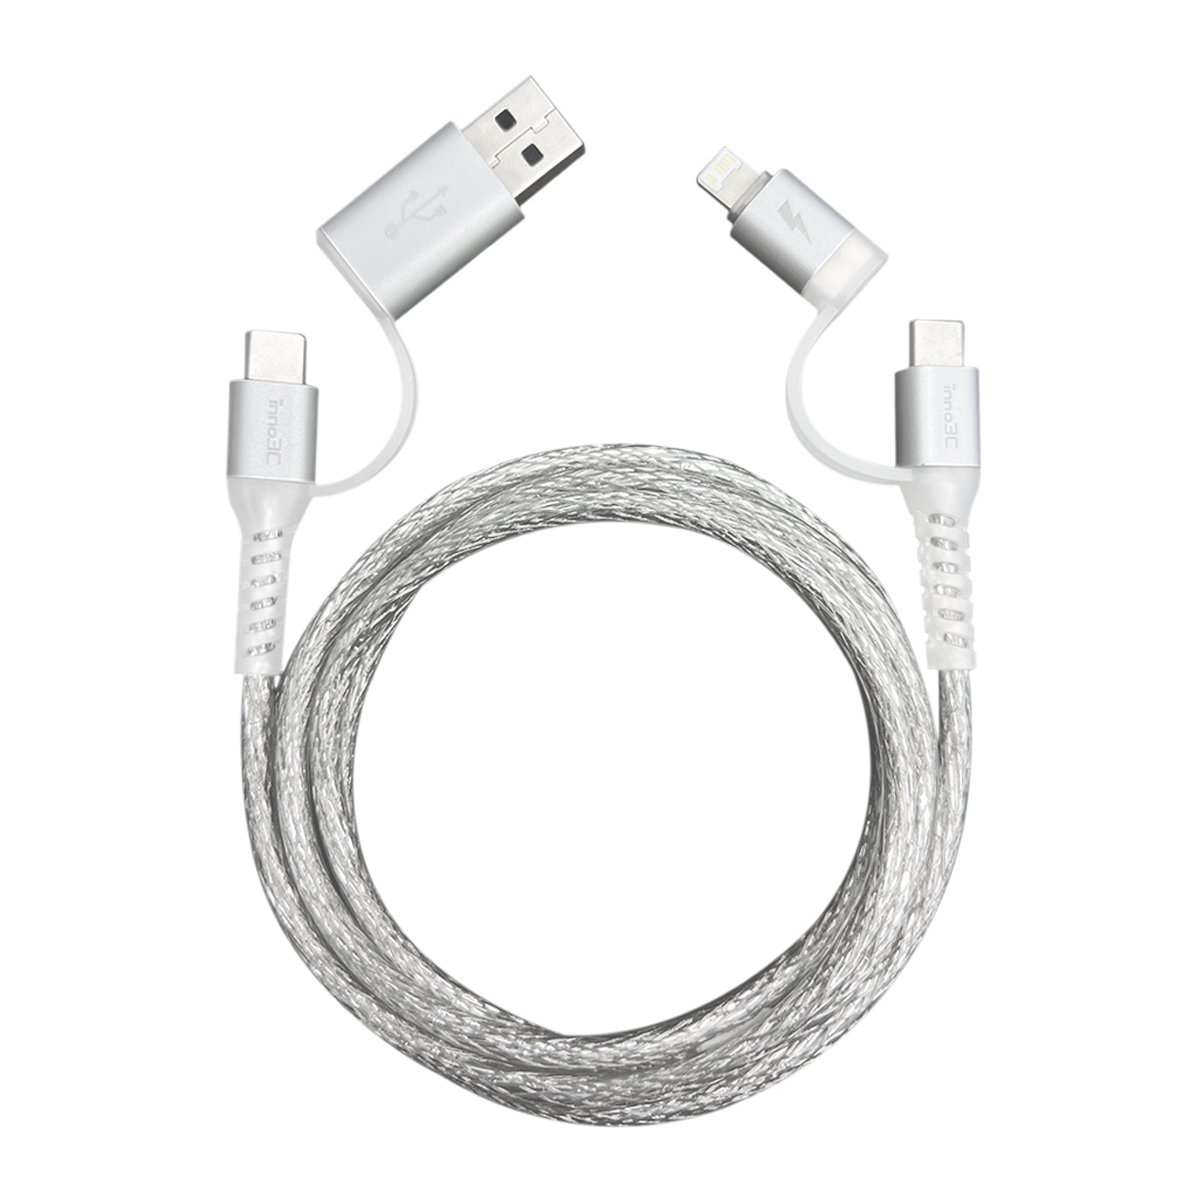 inno3C i-4LA-20 4 in 1 Lightning/Type-C to USB/Type-C Cable (Transparent Silver), , large image number 2